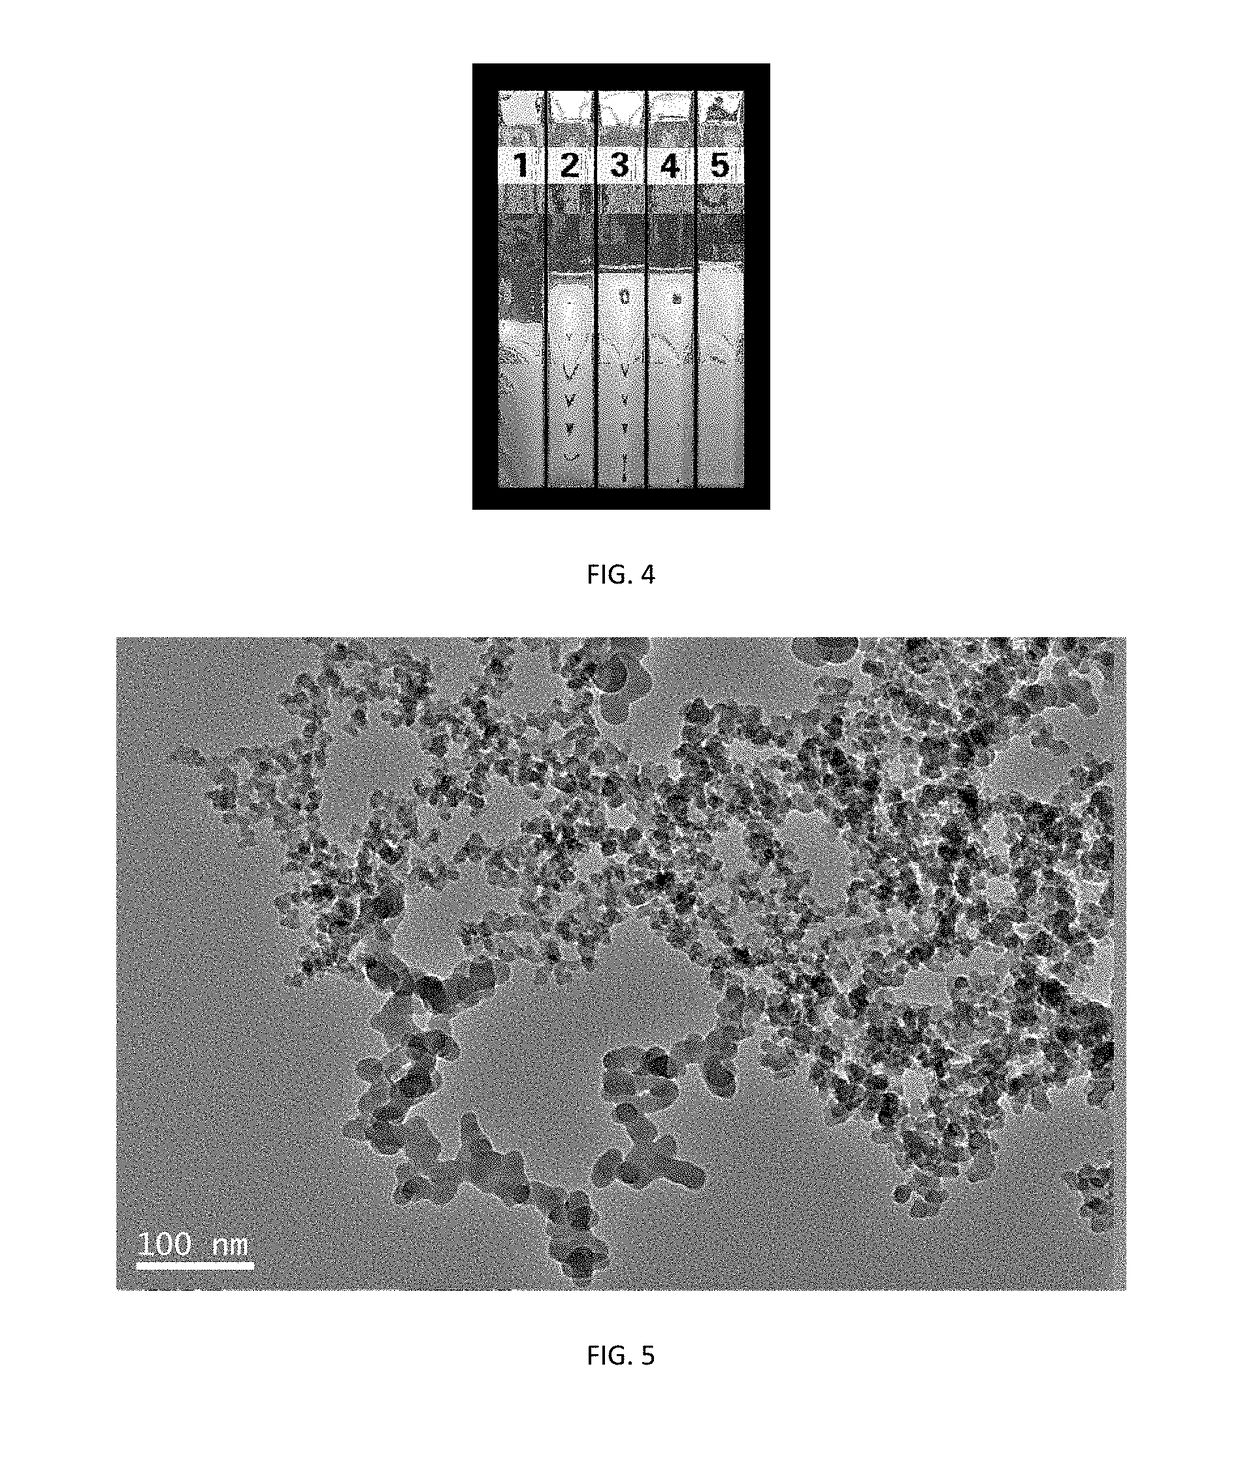 Method for preparing compound dispersoids of hydrophobic nanoparticles and surfactants